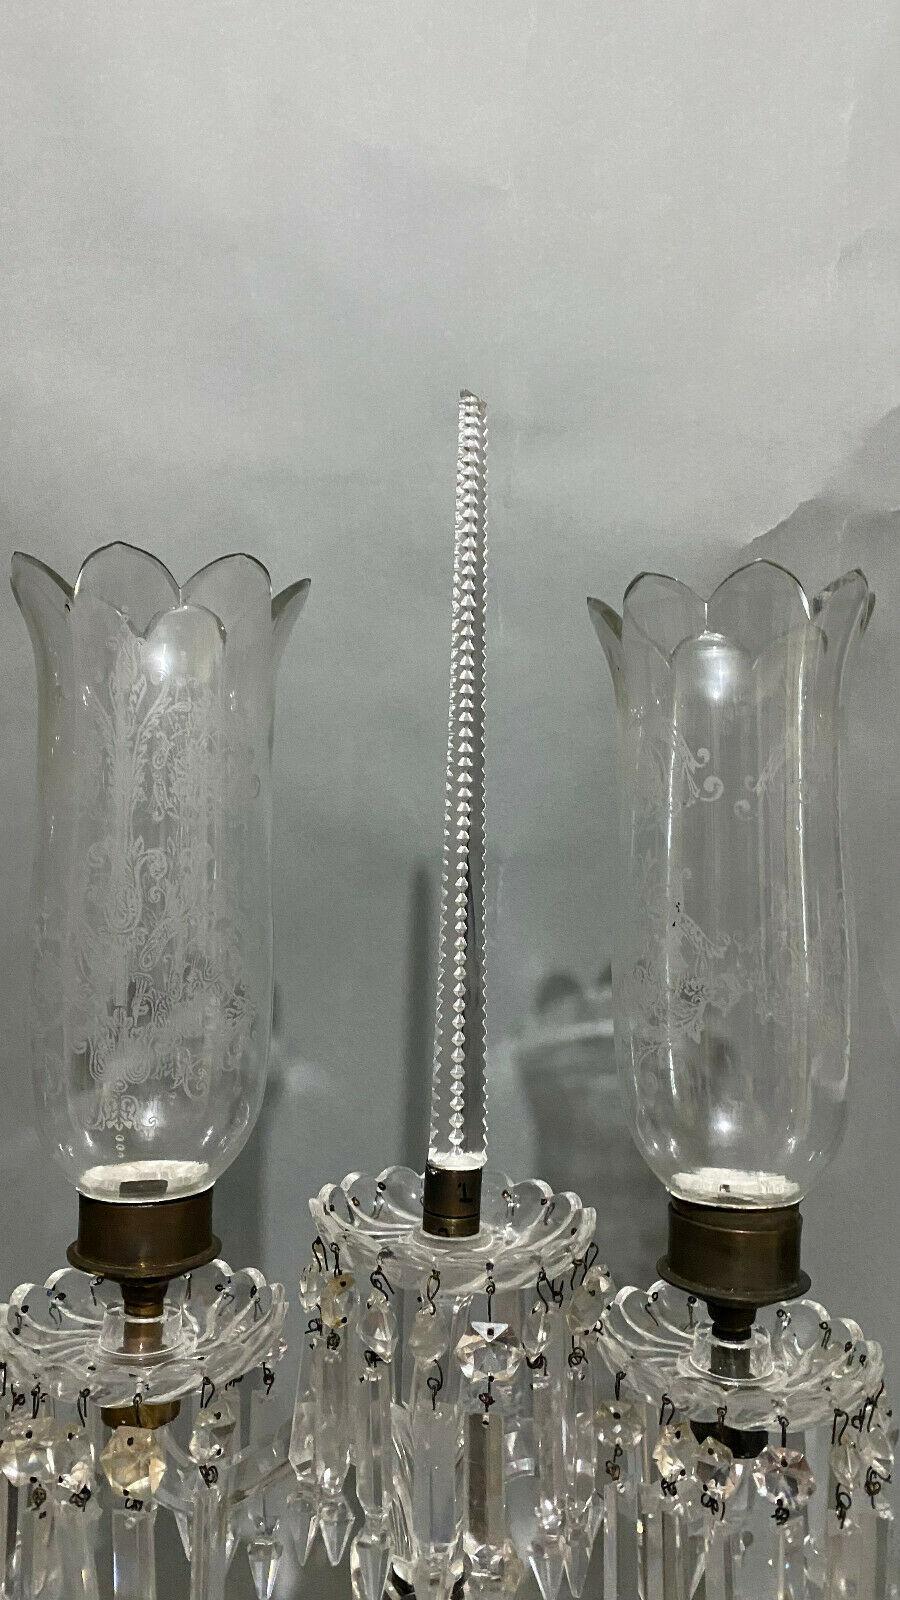 19thc French Napoleon III Cut Crystal Candelabra attributed to Baccarat  For Sale 3